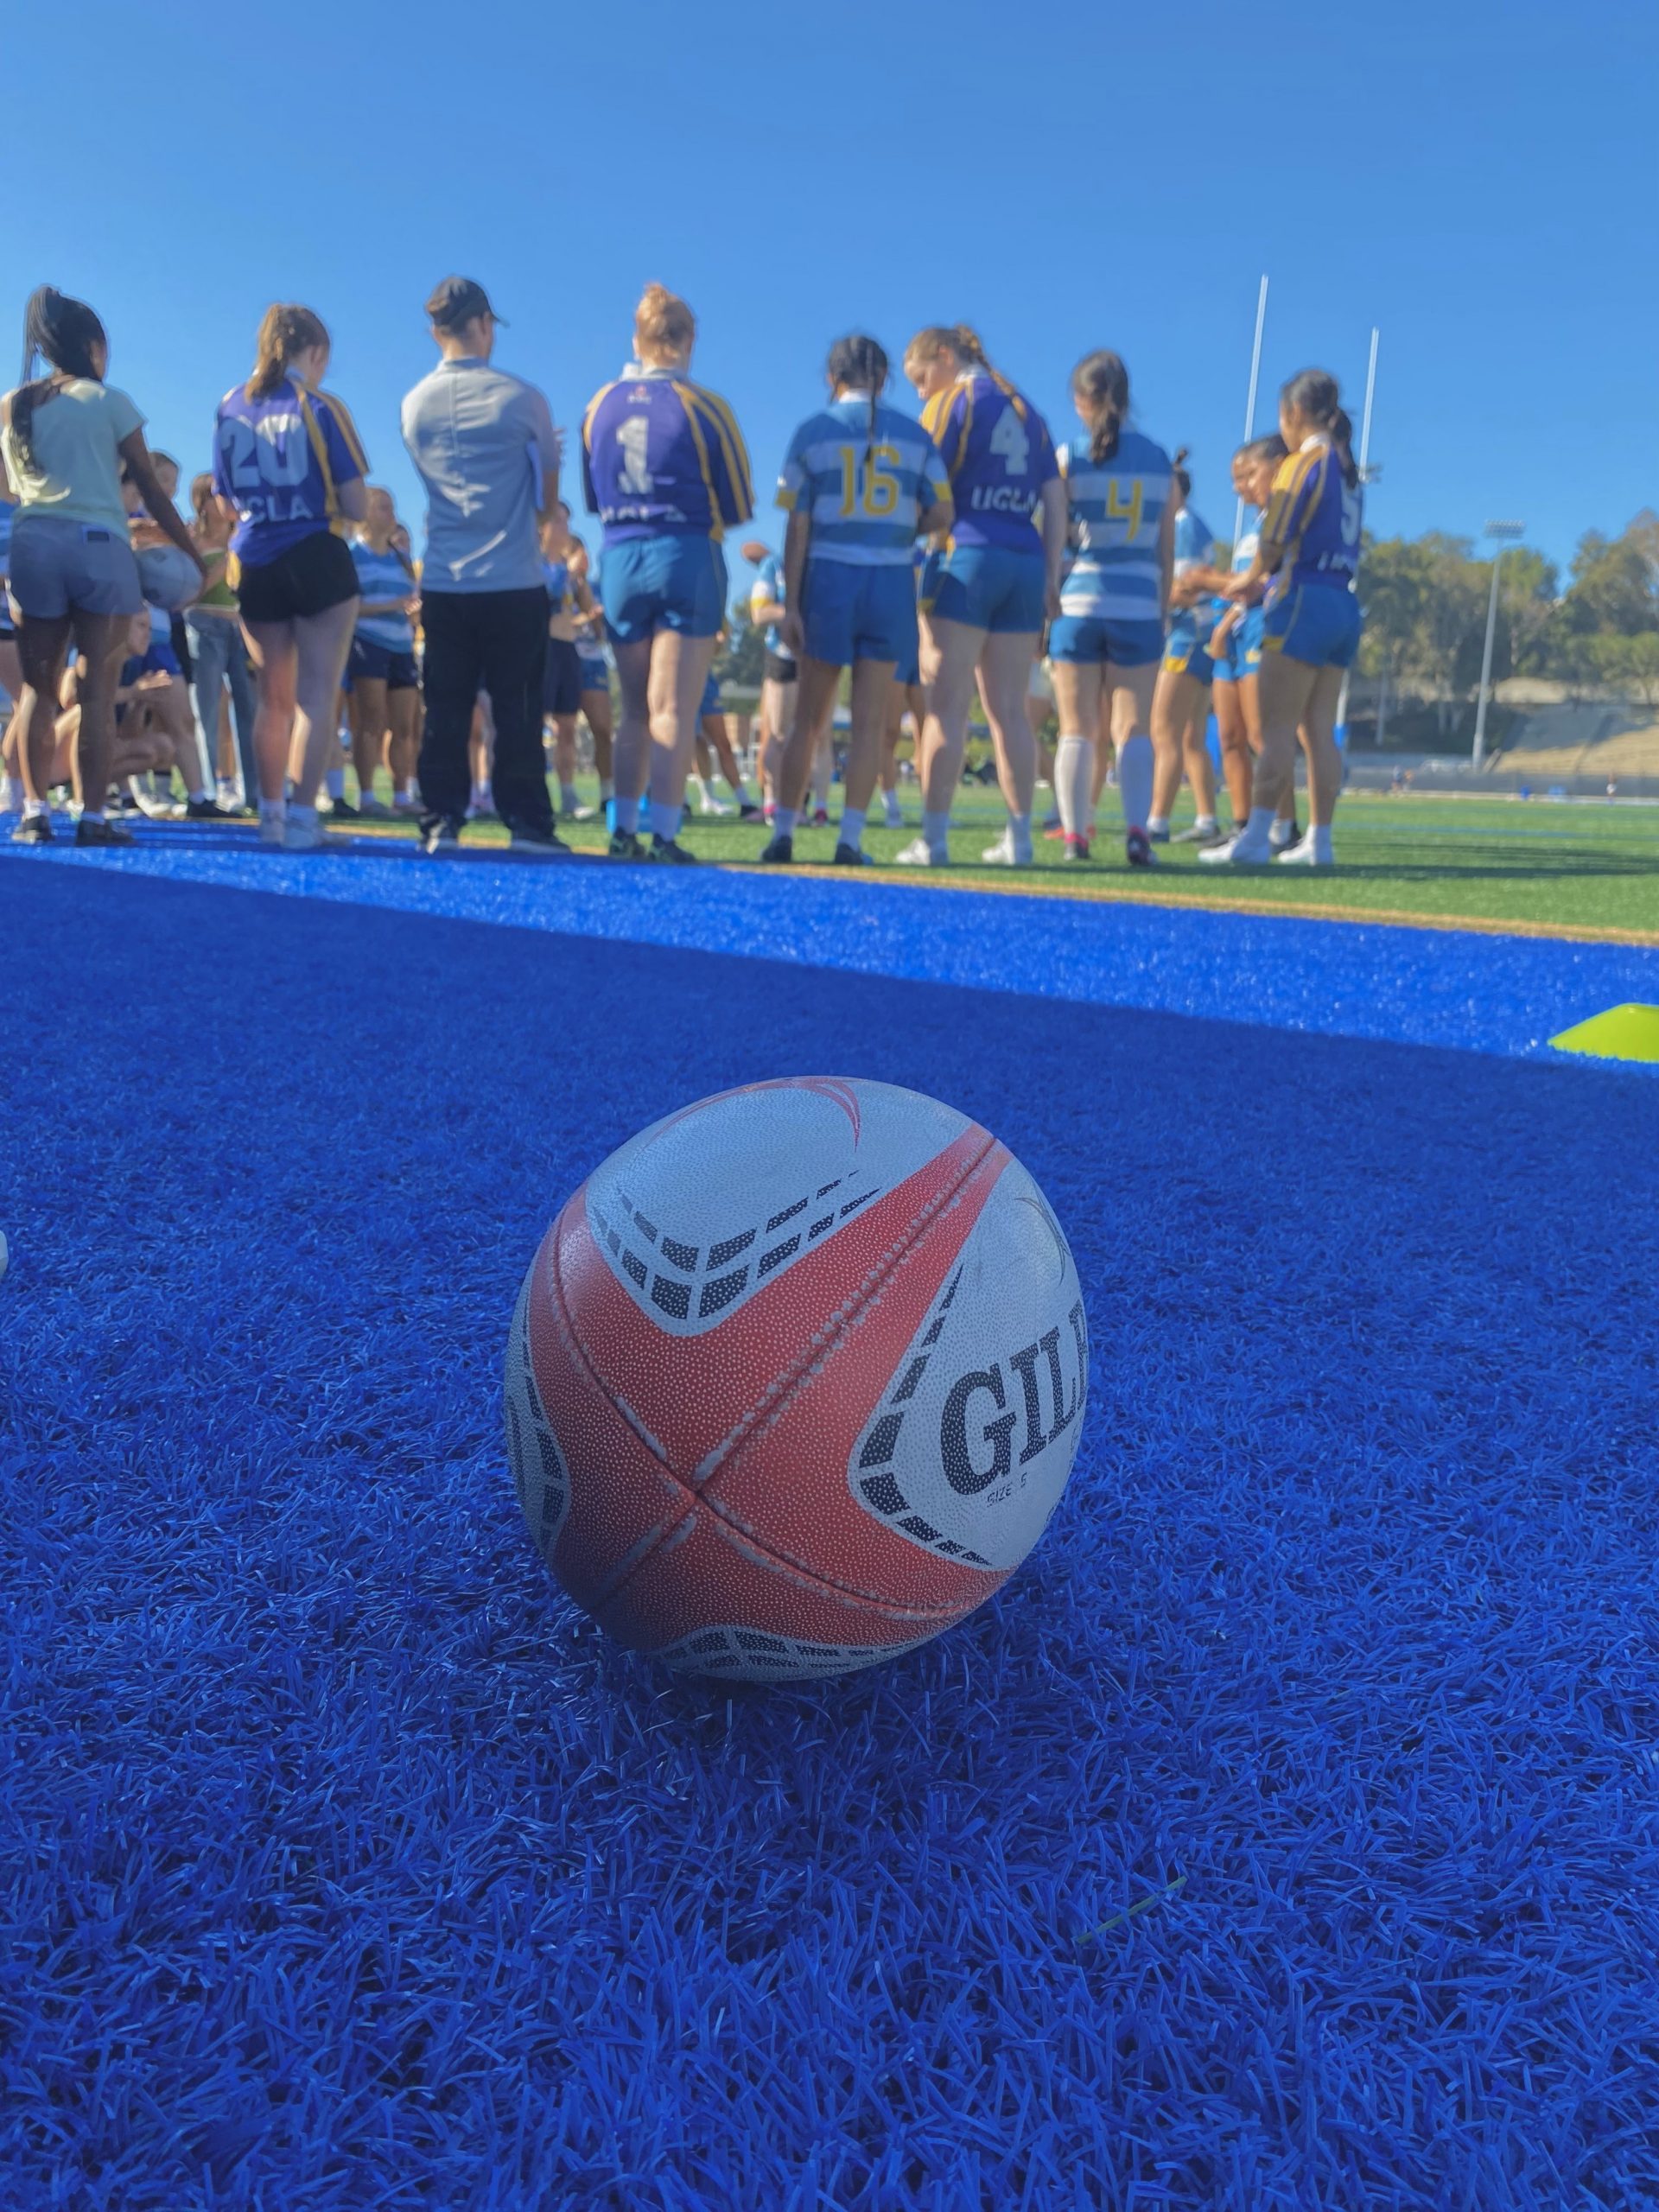 A photograph of a white and orange rugby ball on blue artificial turf. In the background are UCLA rugby players.